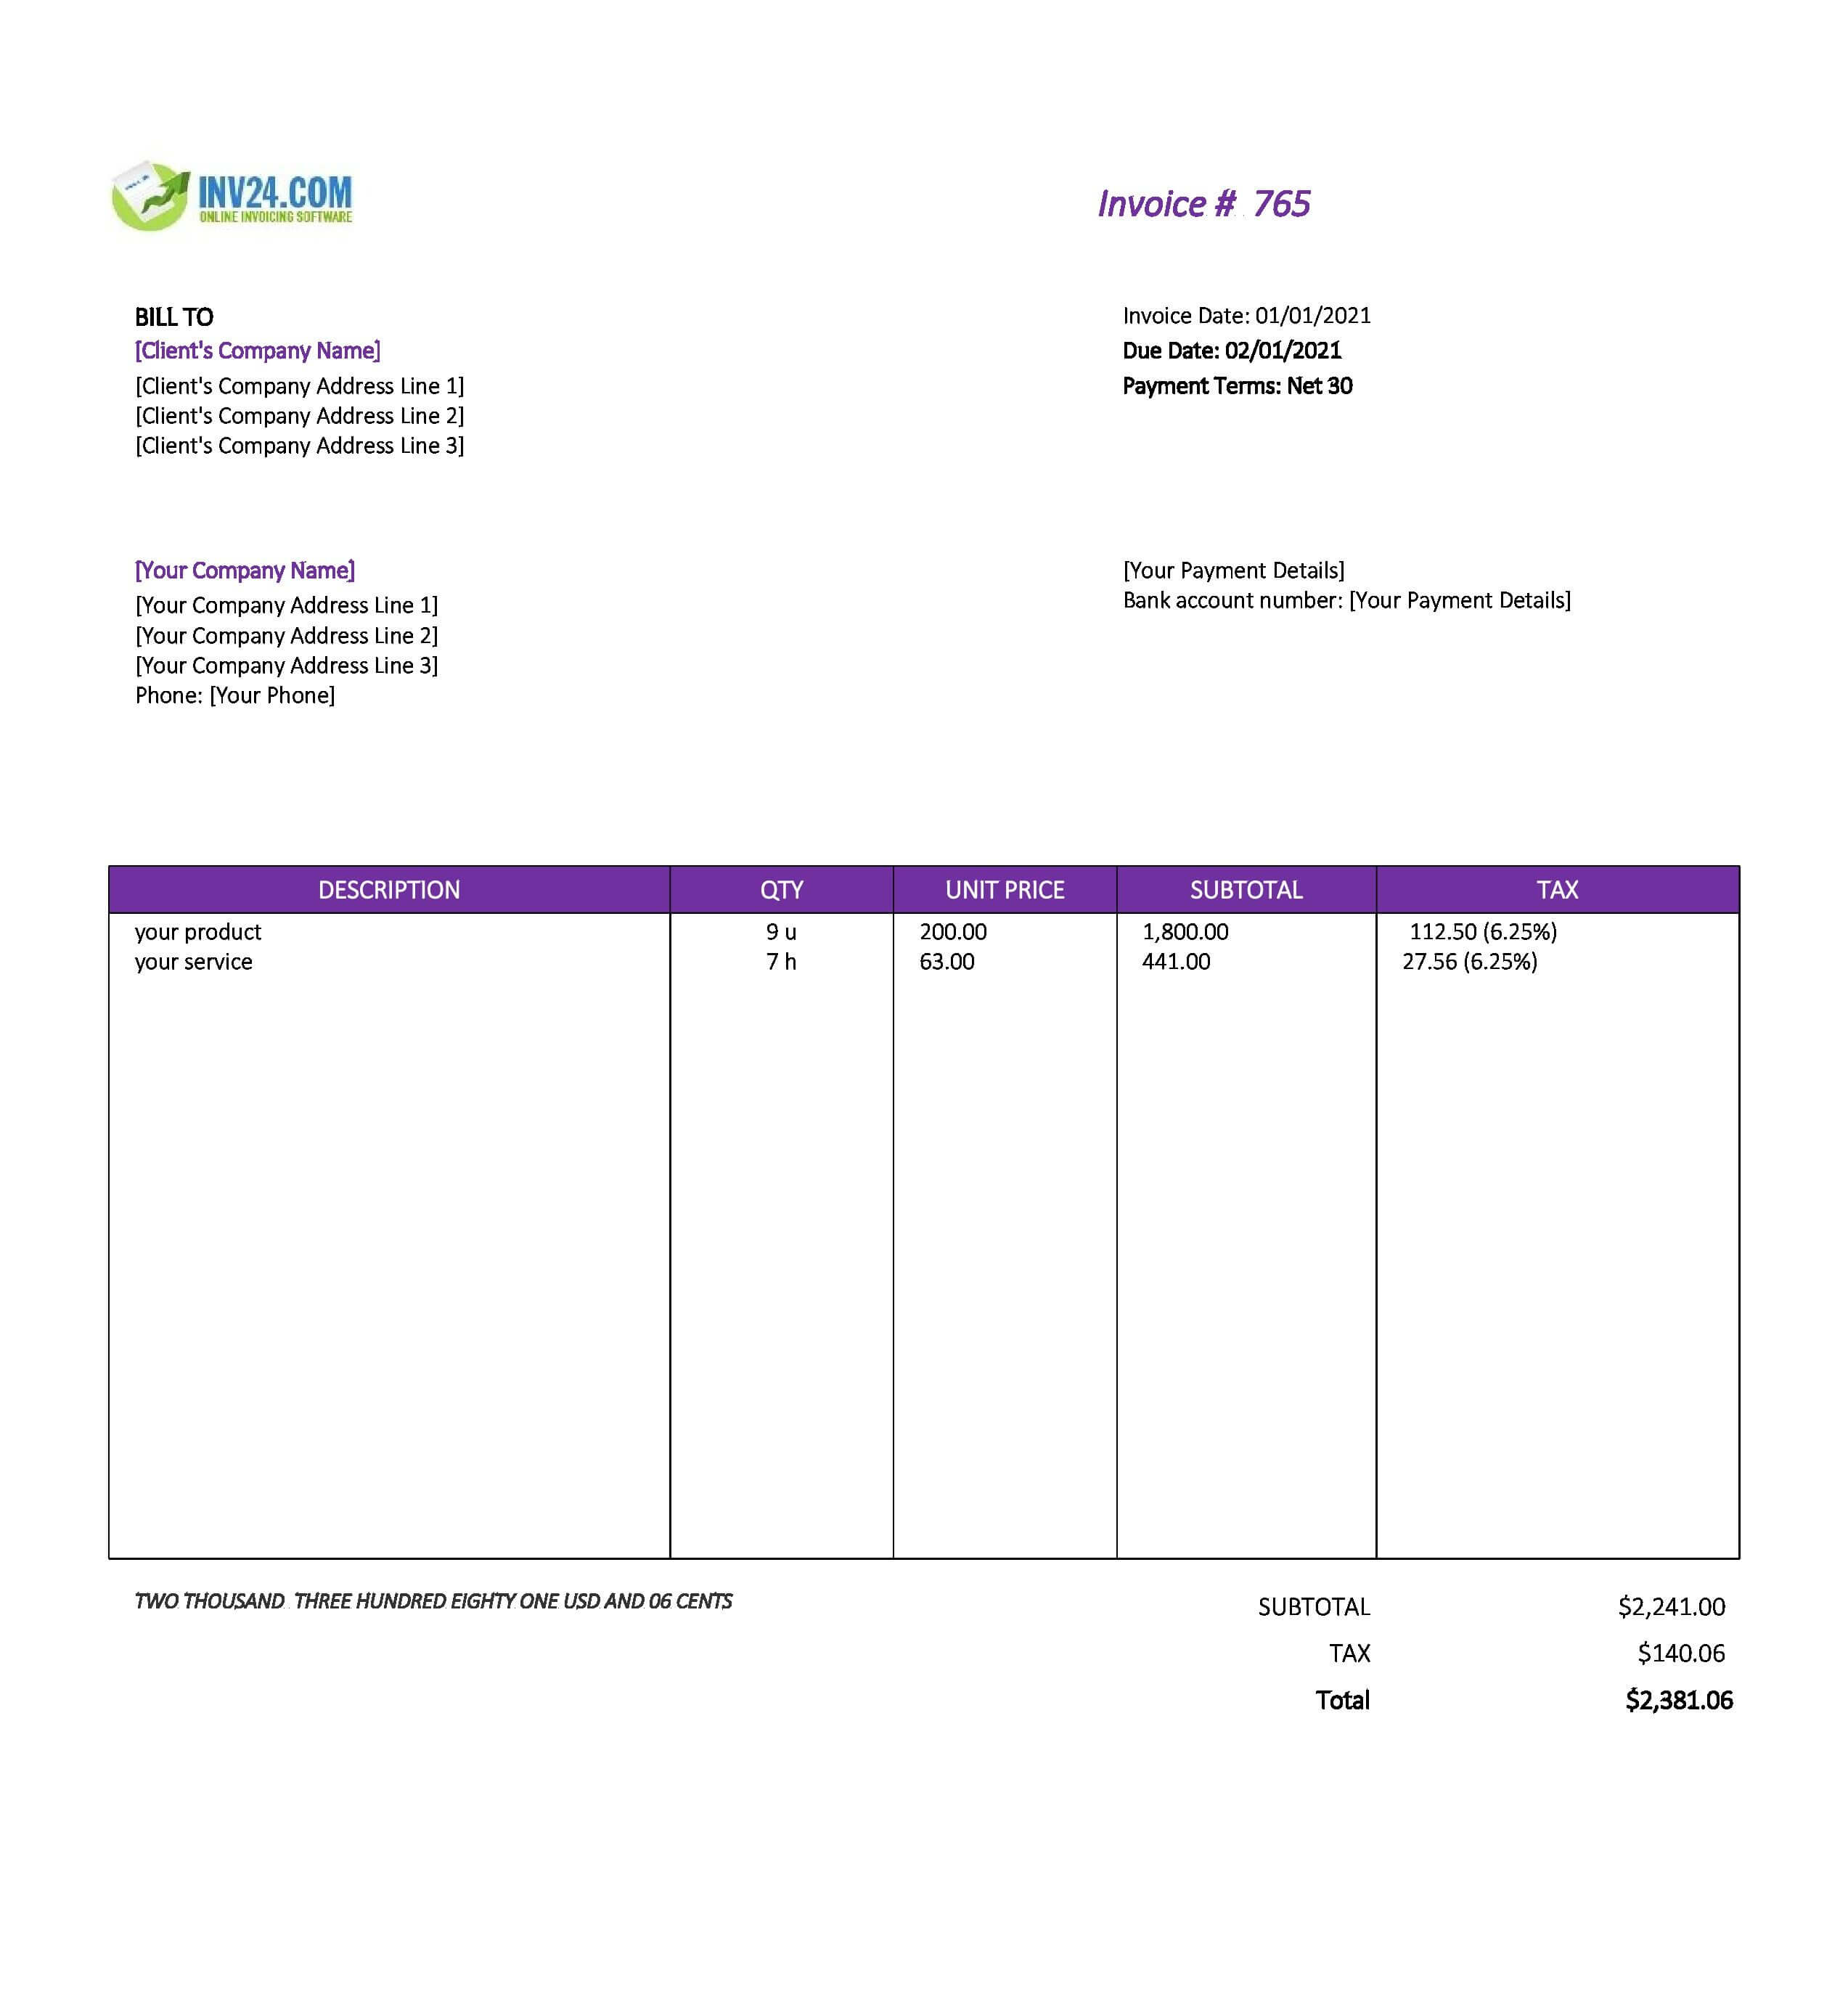 Payment invoice template with NET 30 terms